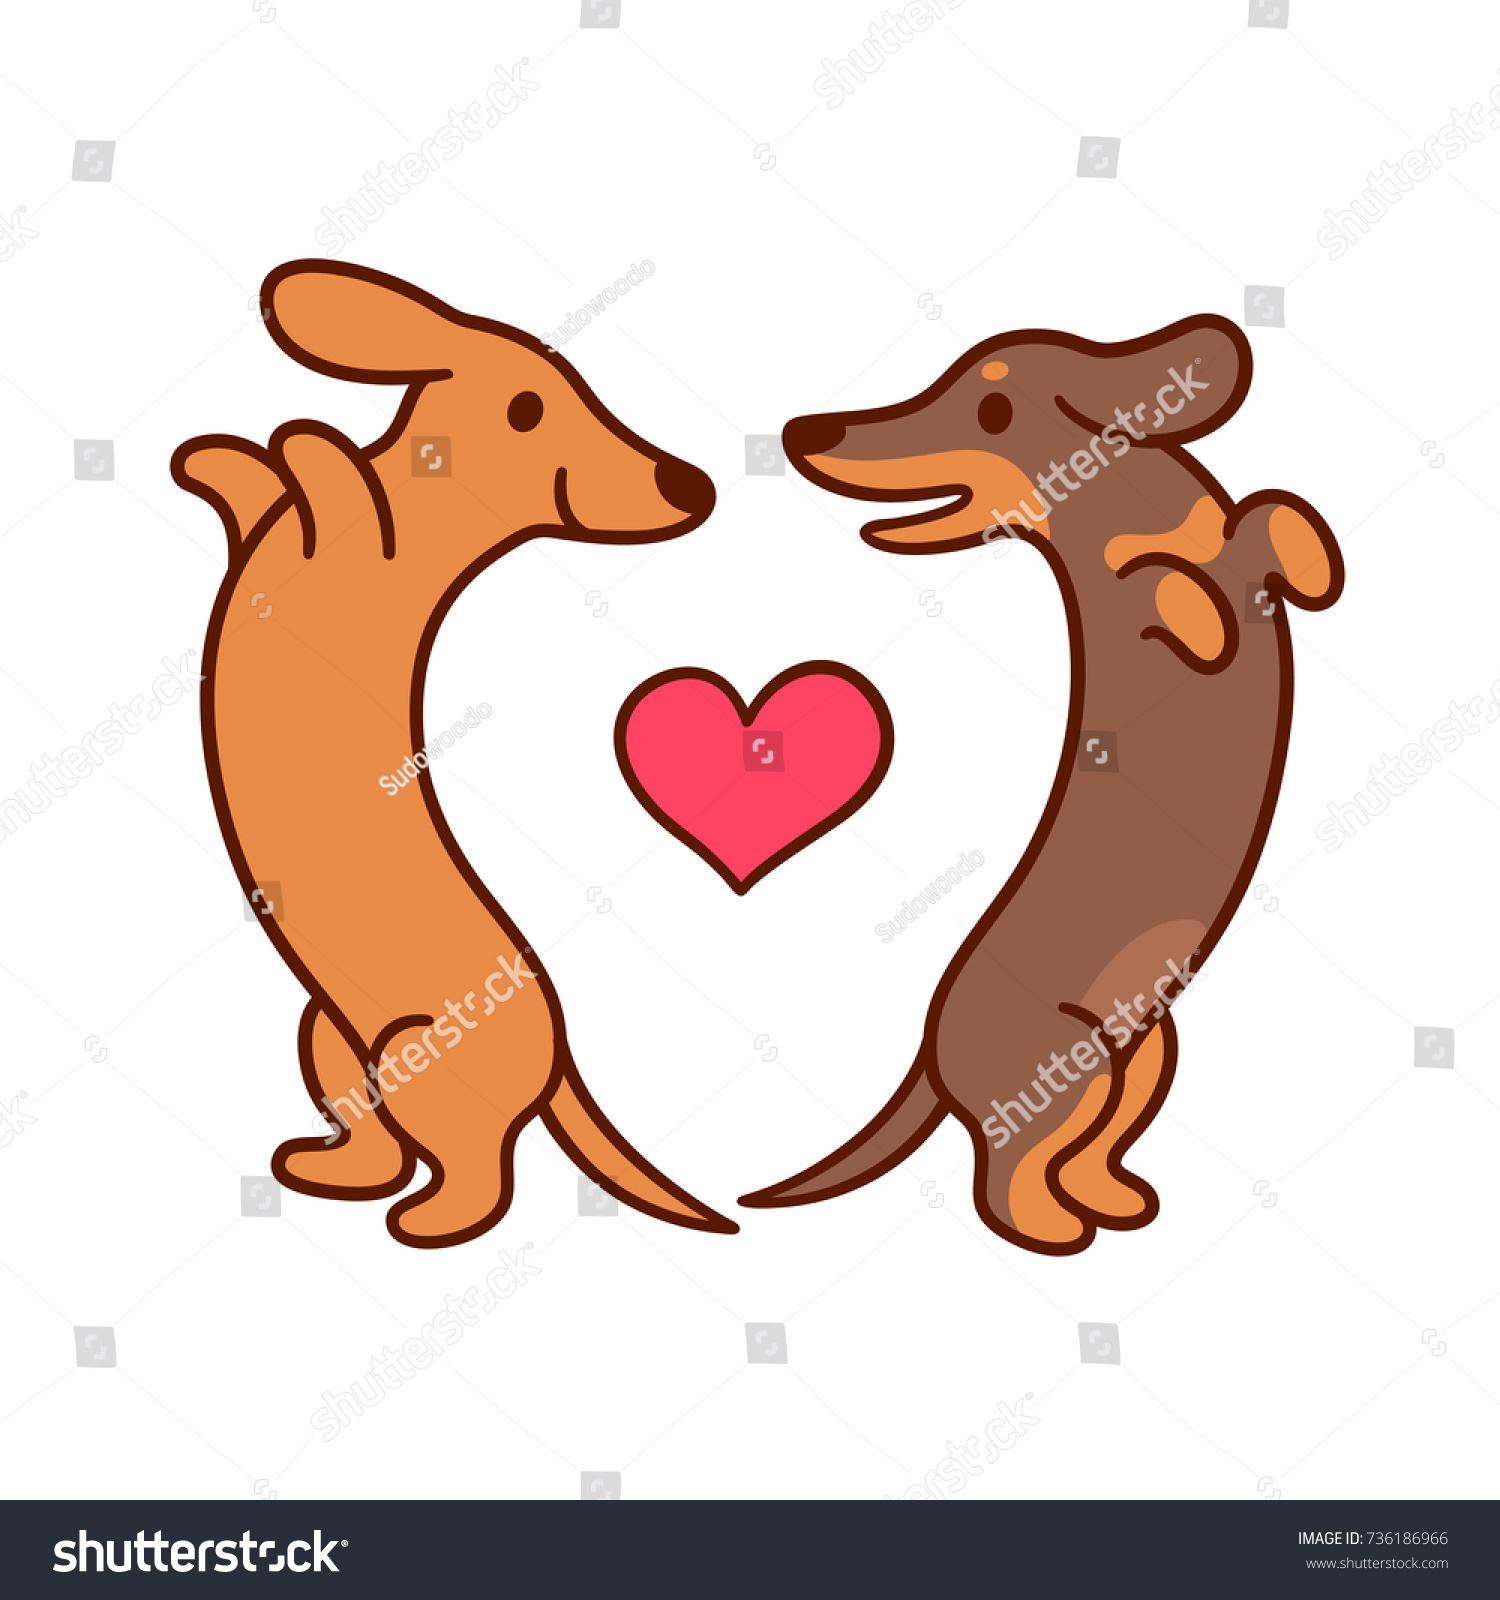 SVG of Cute cartoon dachshunds in love, adorable wiener dogs looking at each other in heart shape. St. Valentines day greeting card vector illustration. svg